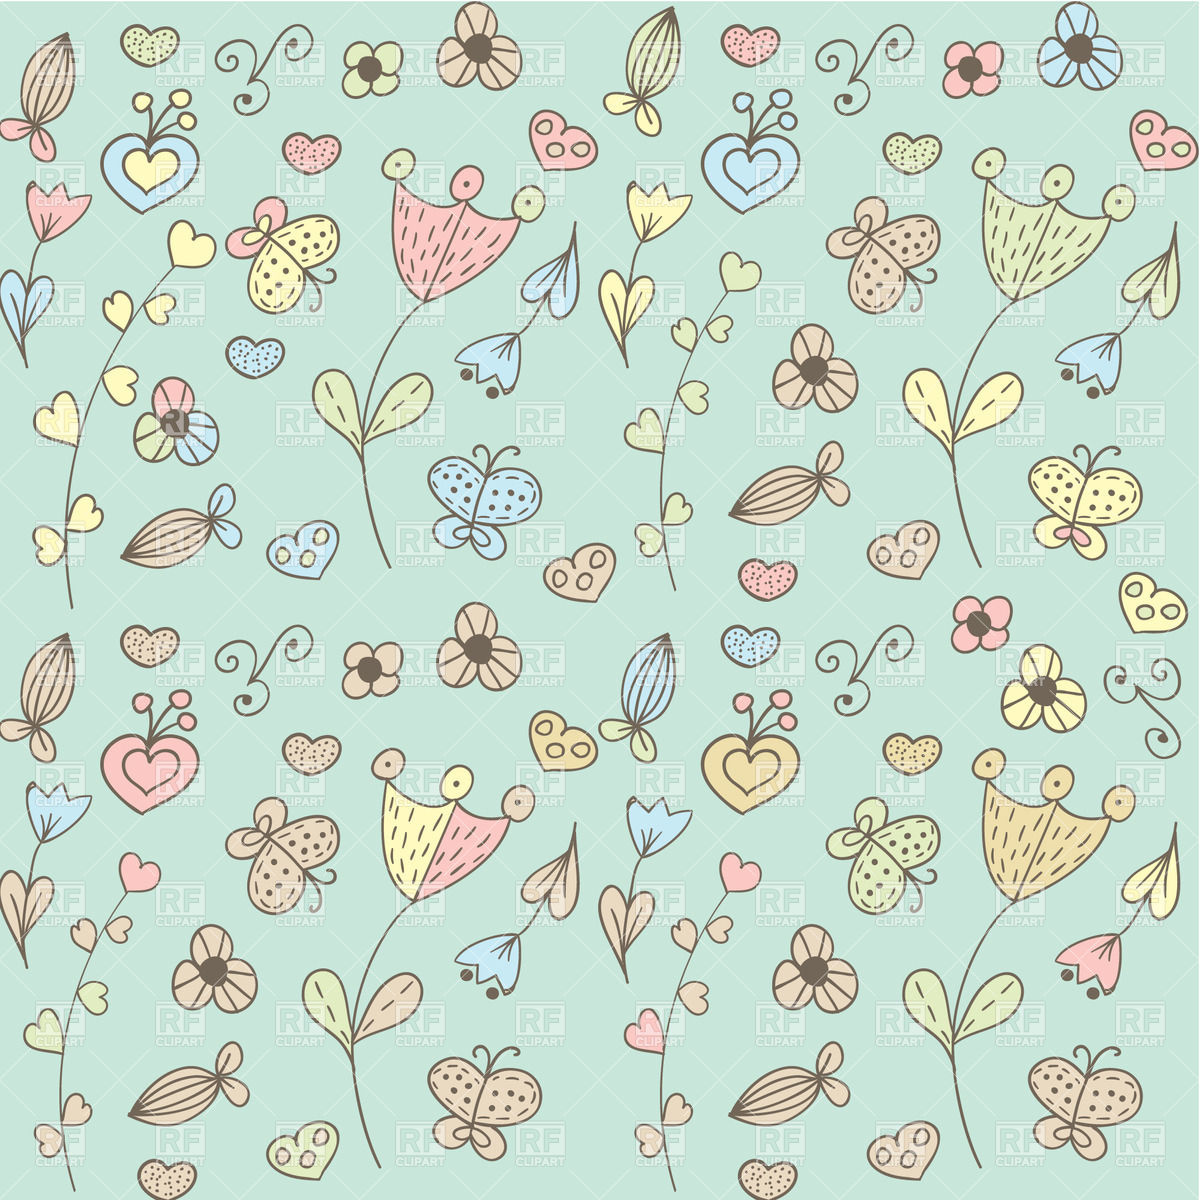 Background With Stylized Hearts And Flowers Royalty